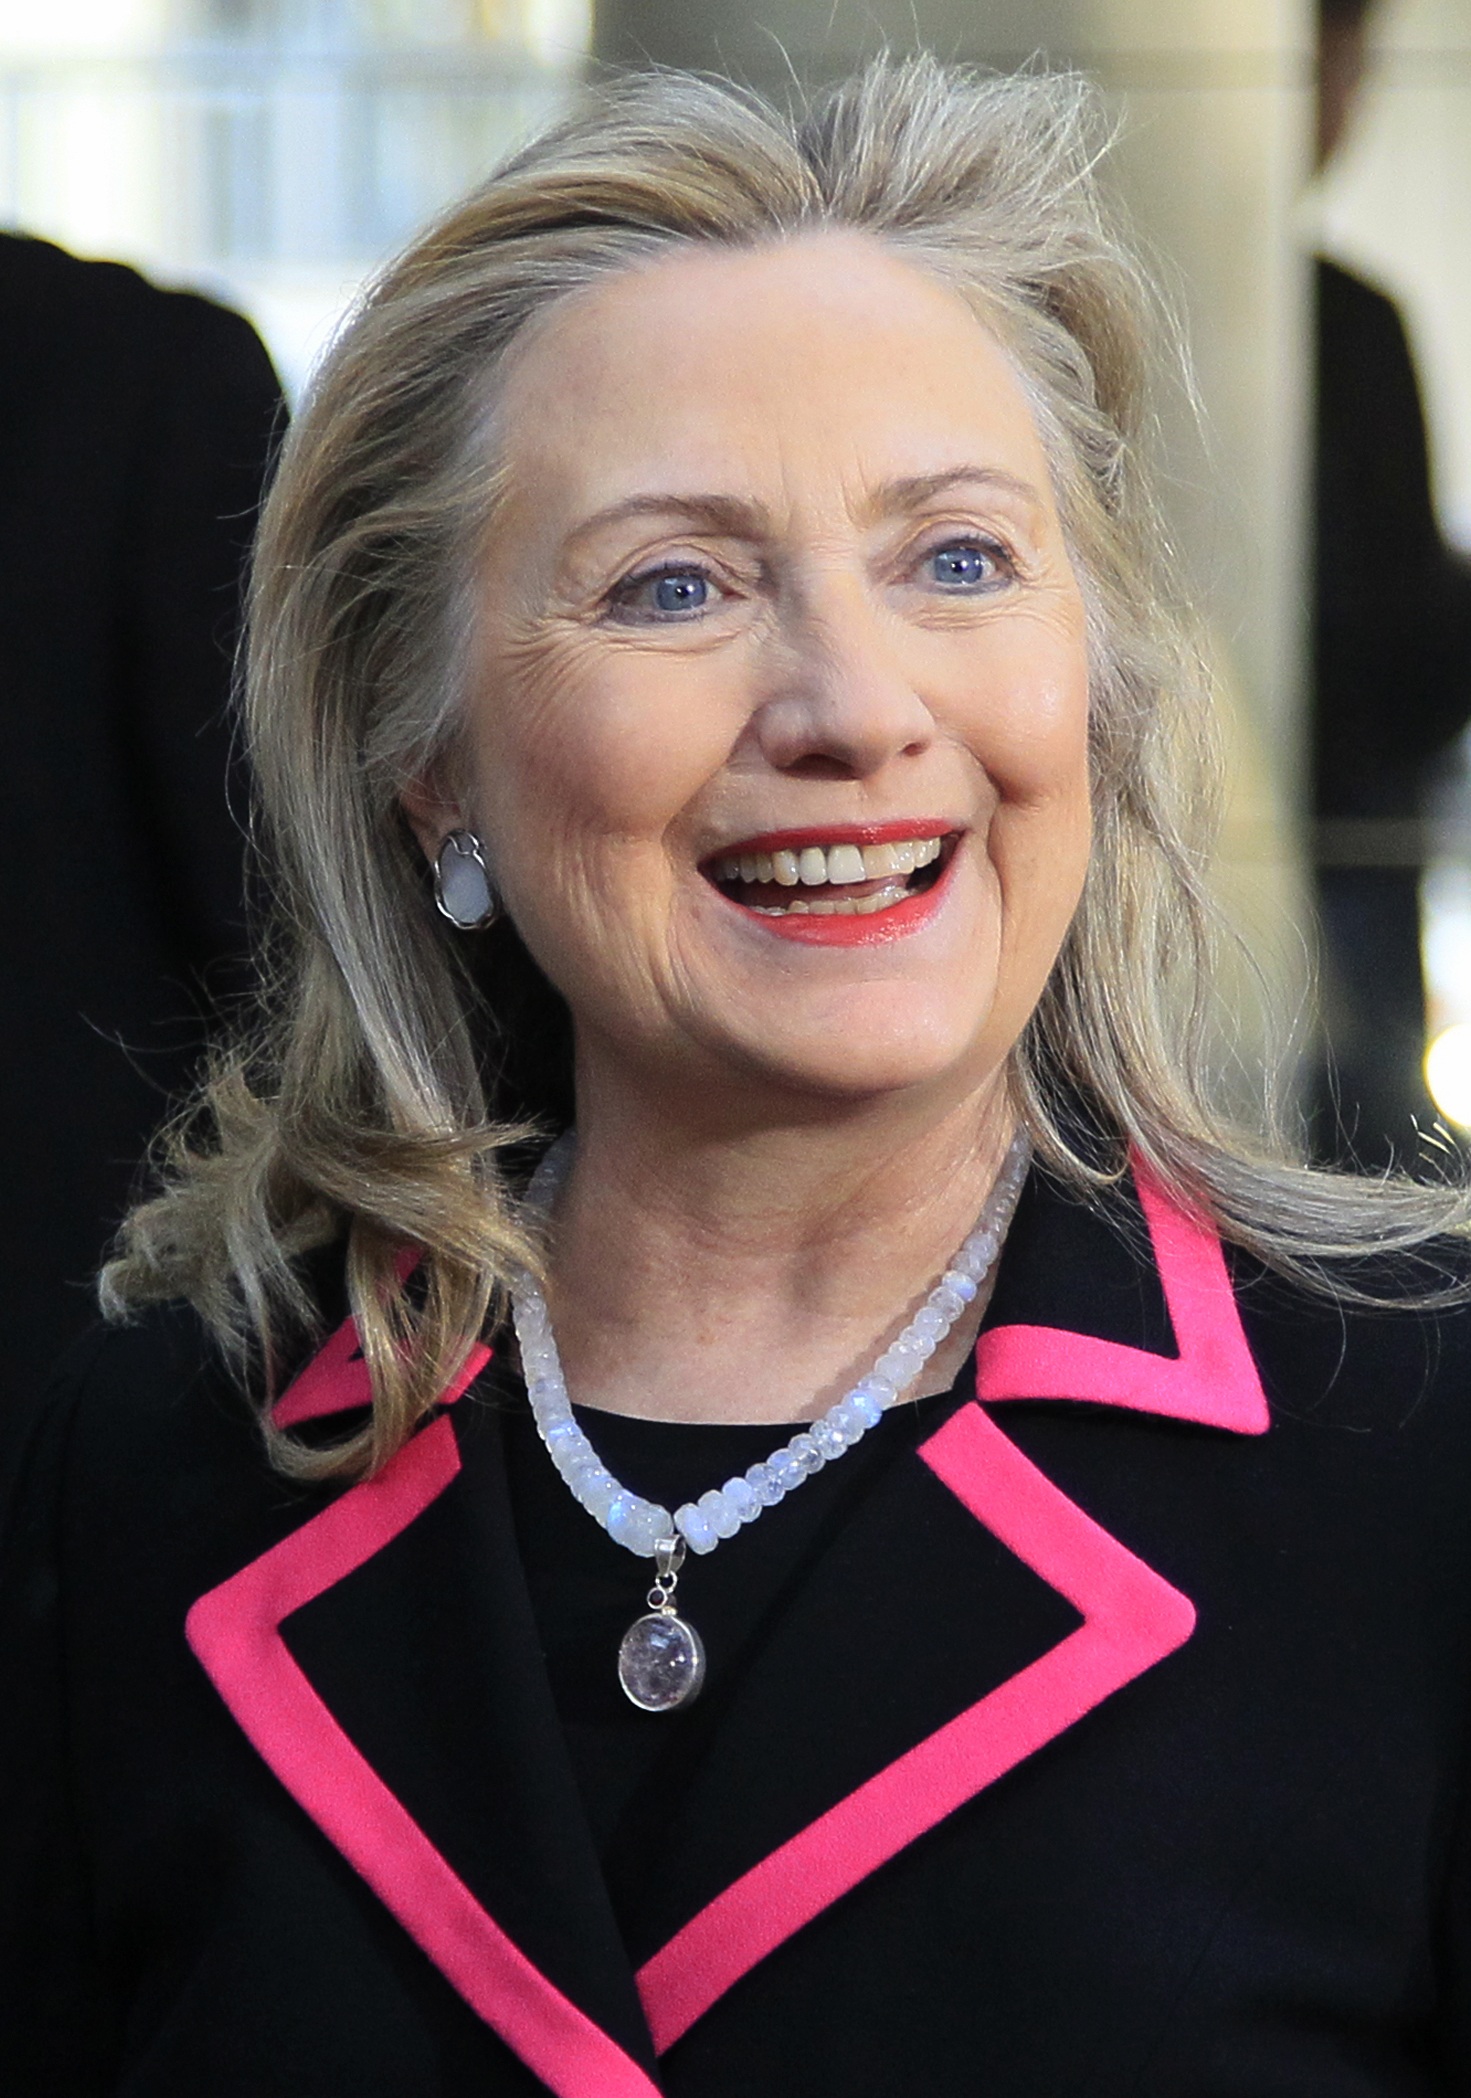 Hillary Rodham Clinton Backgrounds, Compatible - PC, Mobile, Gadgets| 1471x2098 px